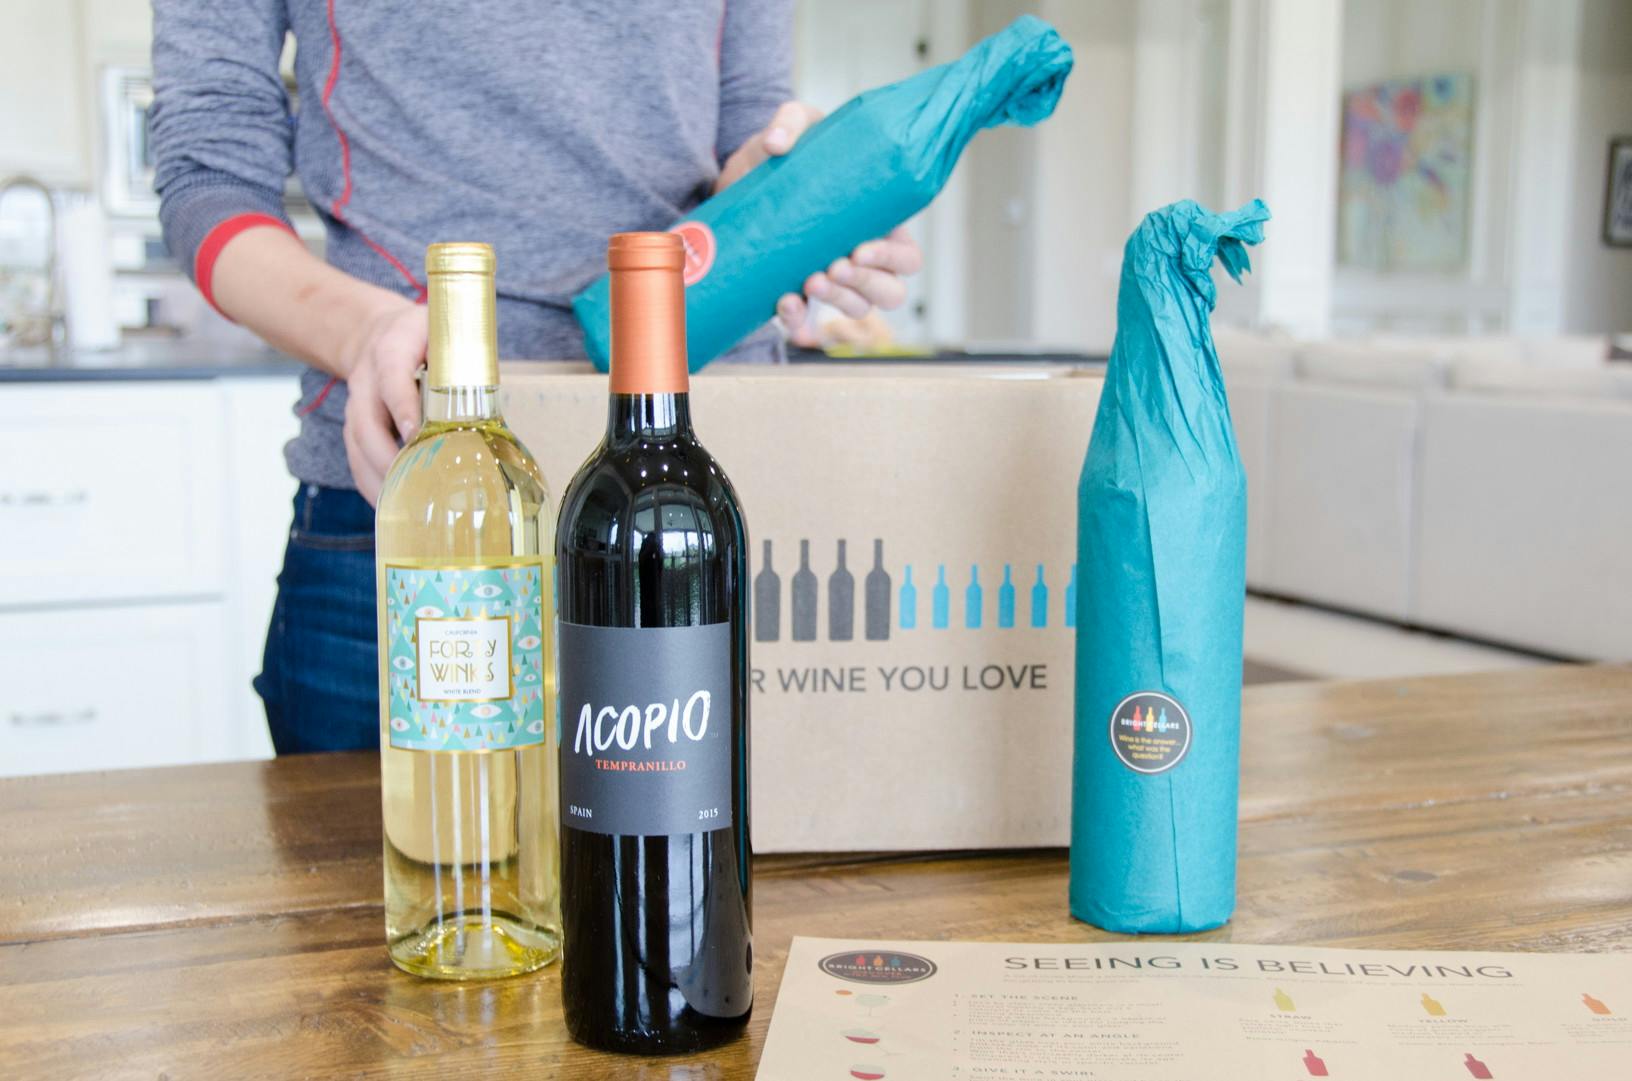 Woman holding a bottle of wine above a box with three wines bottles standing in front of the box.